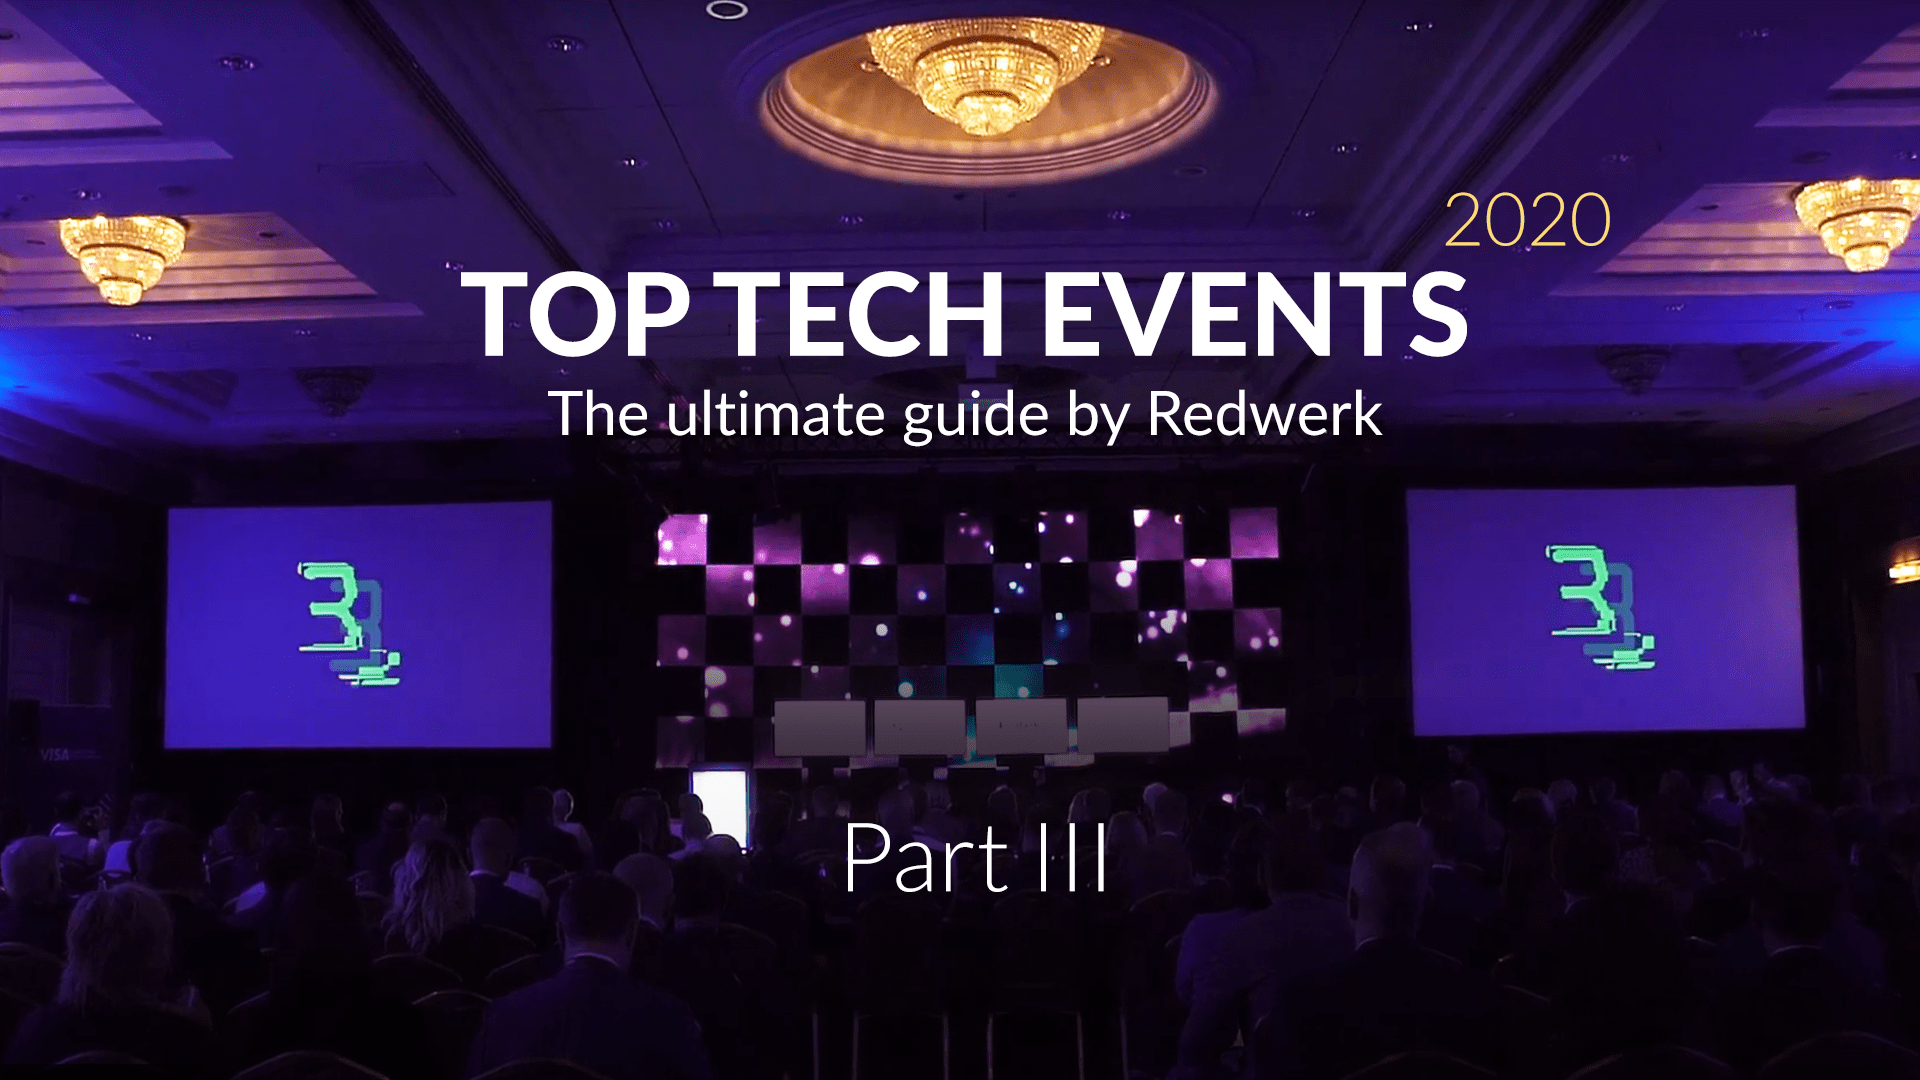 Top Tech Events in 2020: Quarter 3 Ultimate Guide